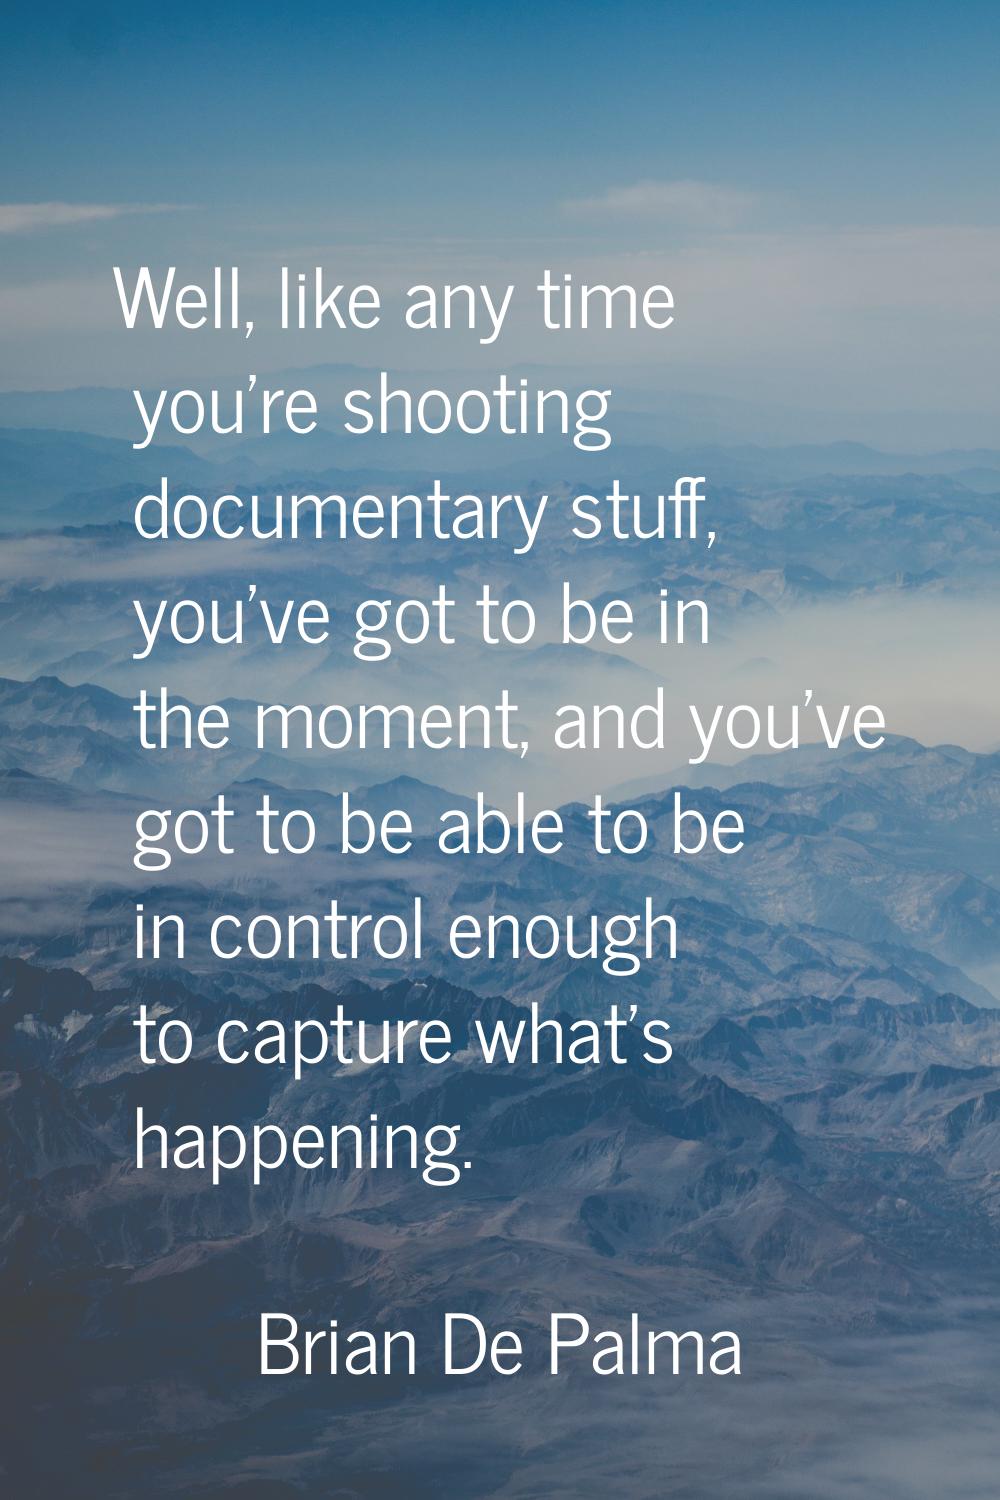 Well, like any time you're shooting documentary stuff, you've got to be in the moment, and you've g